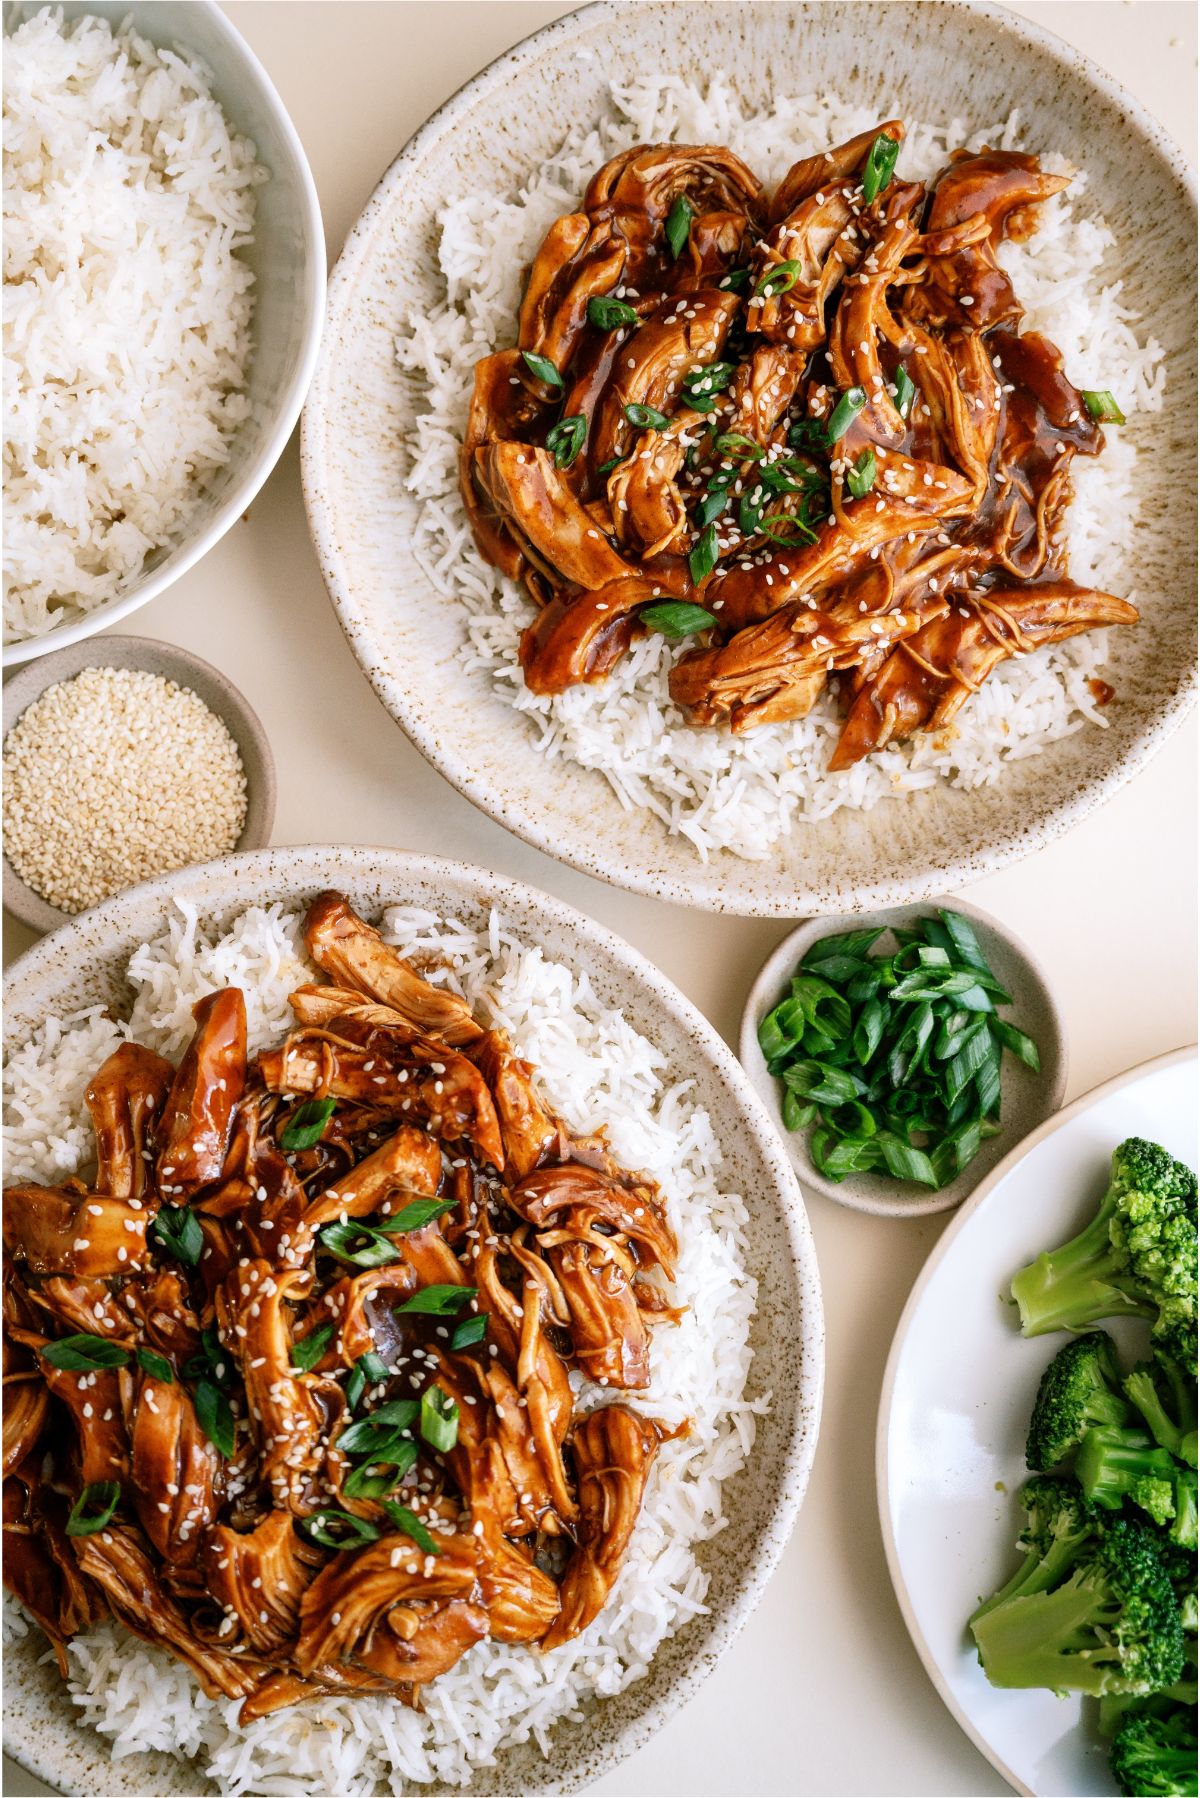 Two plates of rice topped with shredded Slow Cooker Asian Glazed Chicken